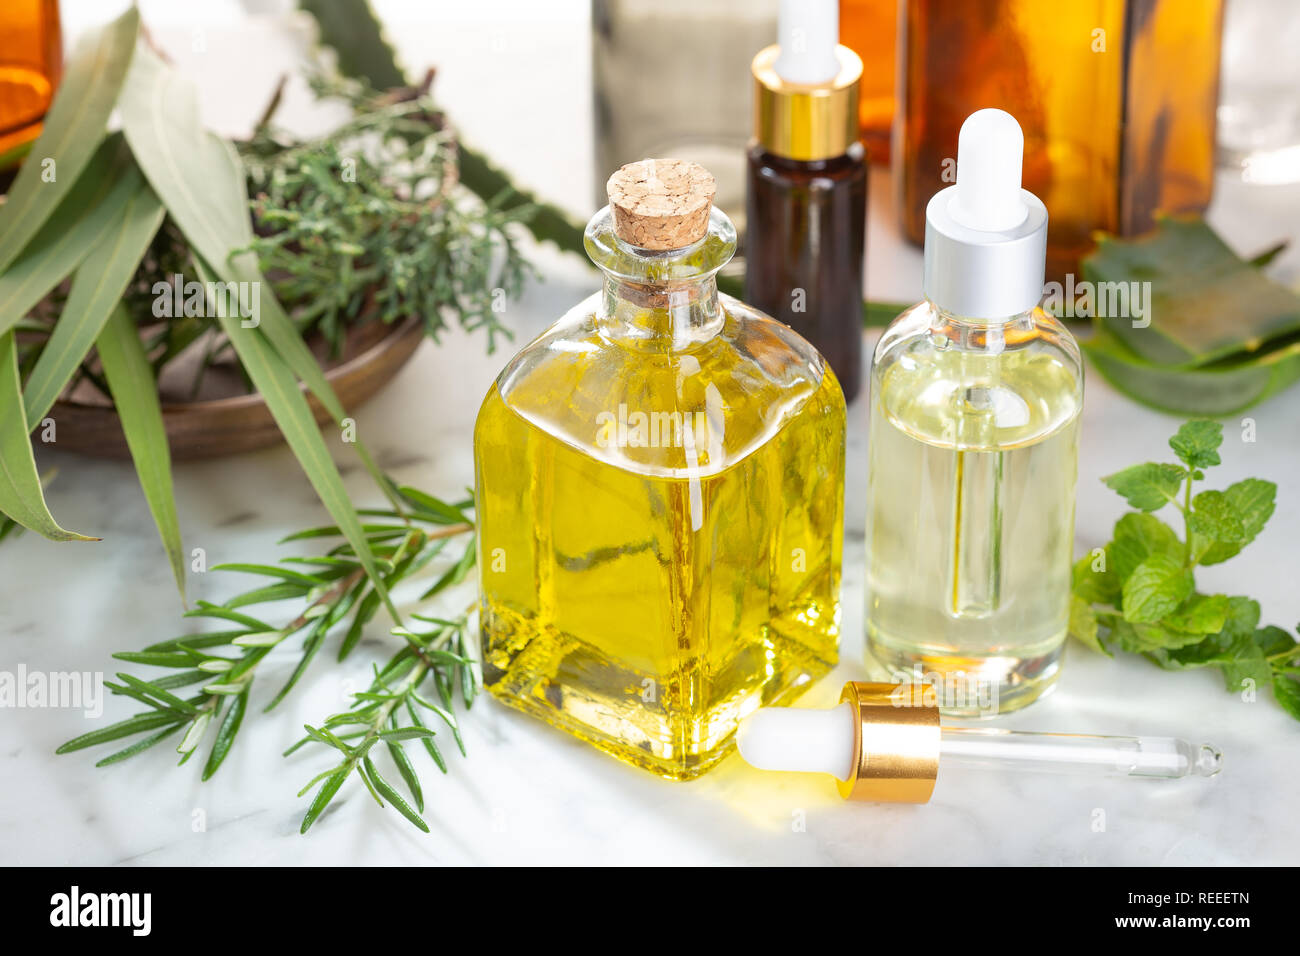 Herbal essential oil. Rosemary oil, eucalyptus oil, aloe vera, pepermint and fir oil for aromatherapy, wellness, skin care, herbal remedies Stock Photo